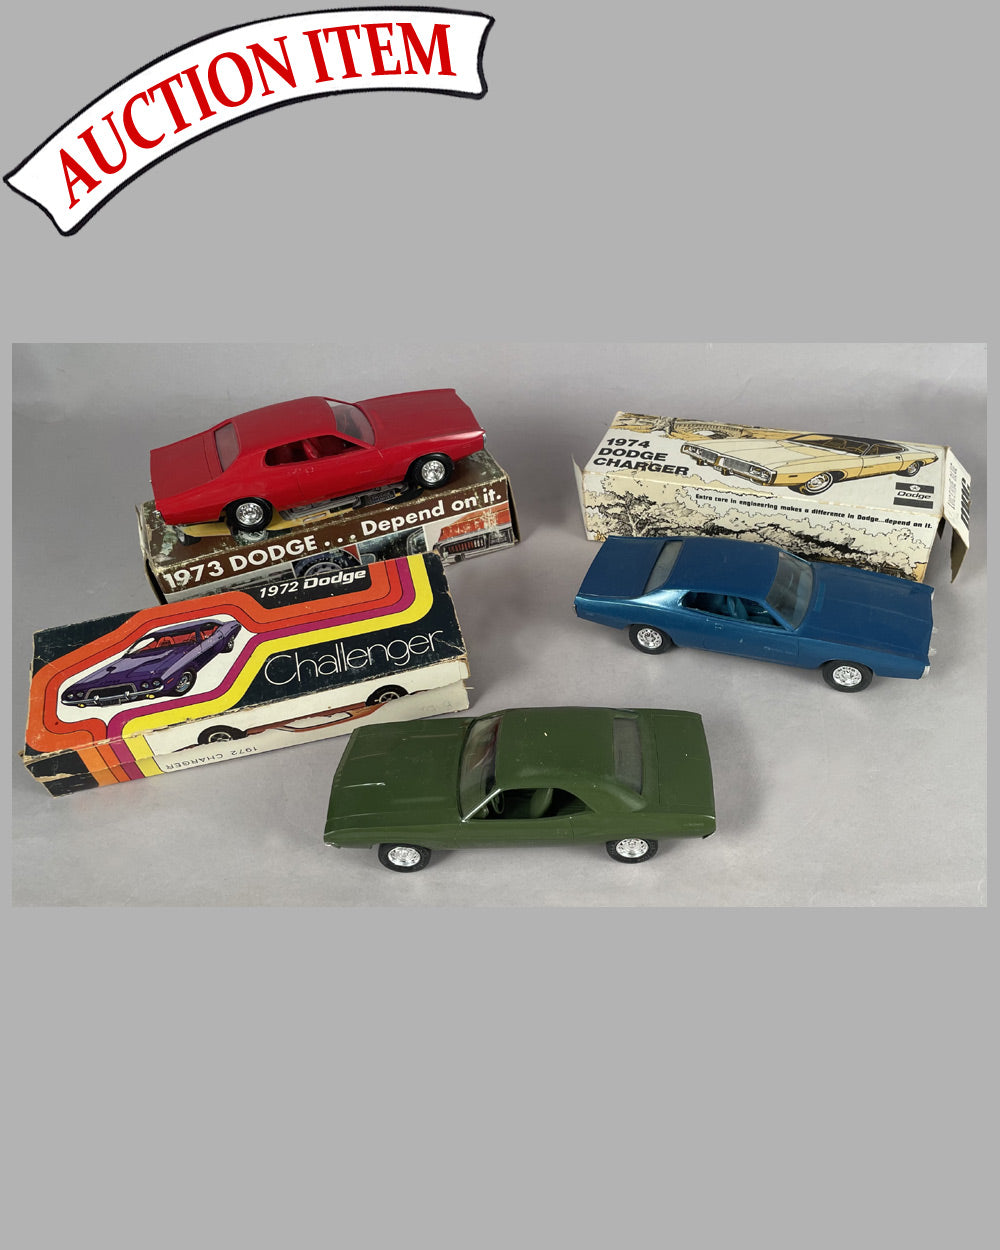 15 - Collection of 3 Dodge Charger promotional models, 1972, 1973 and 1974